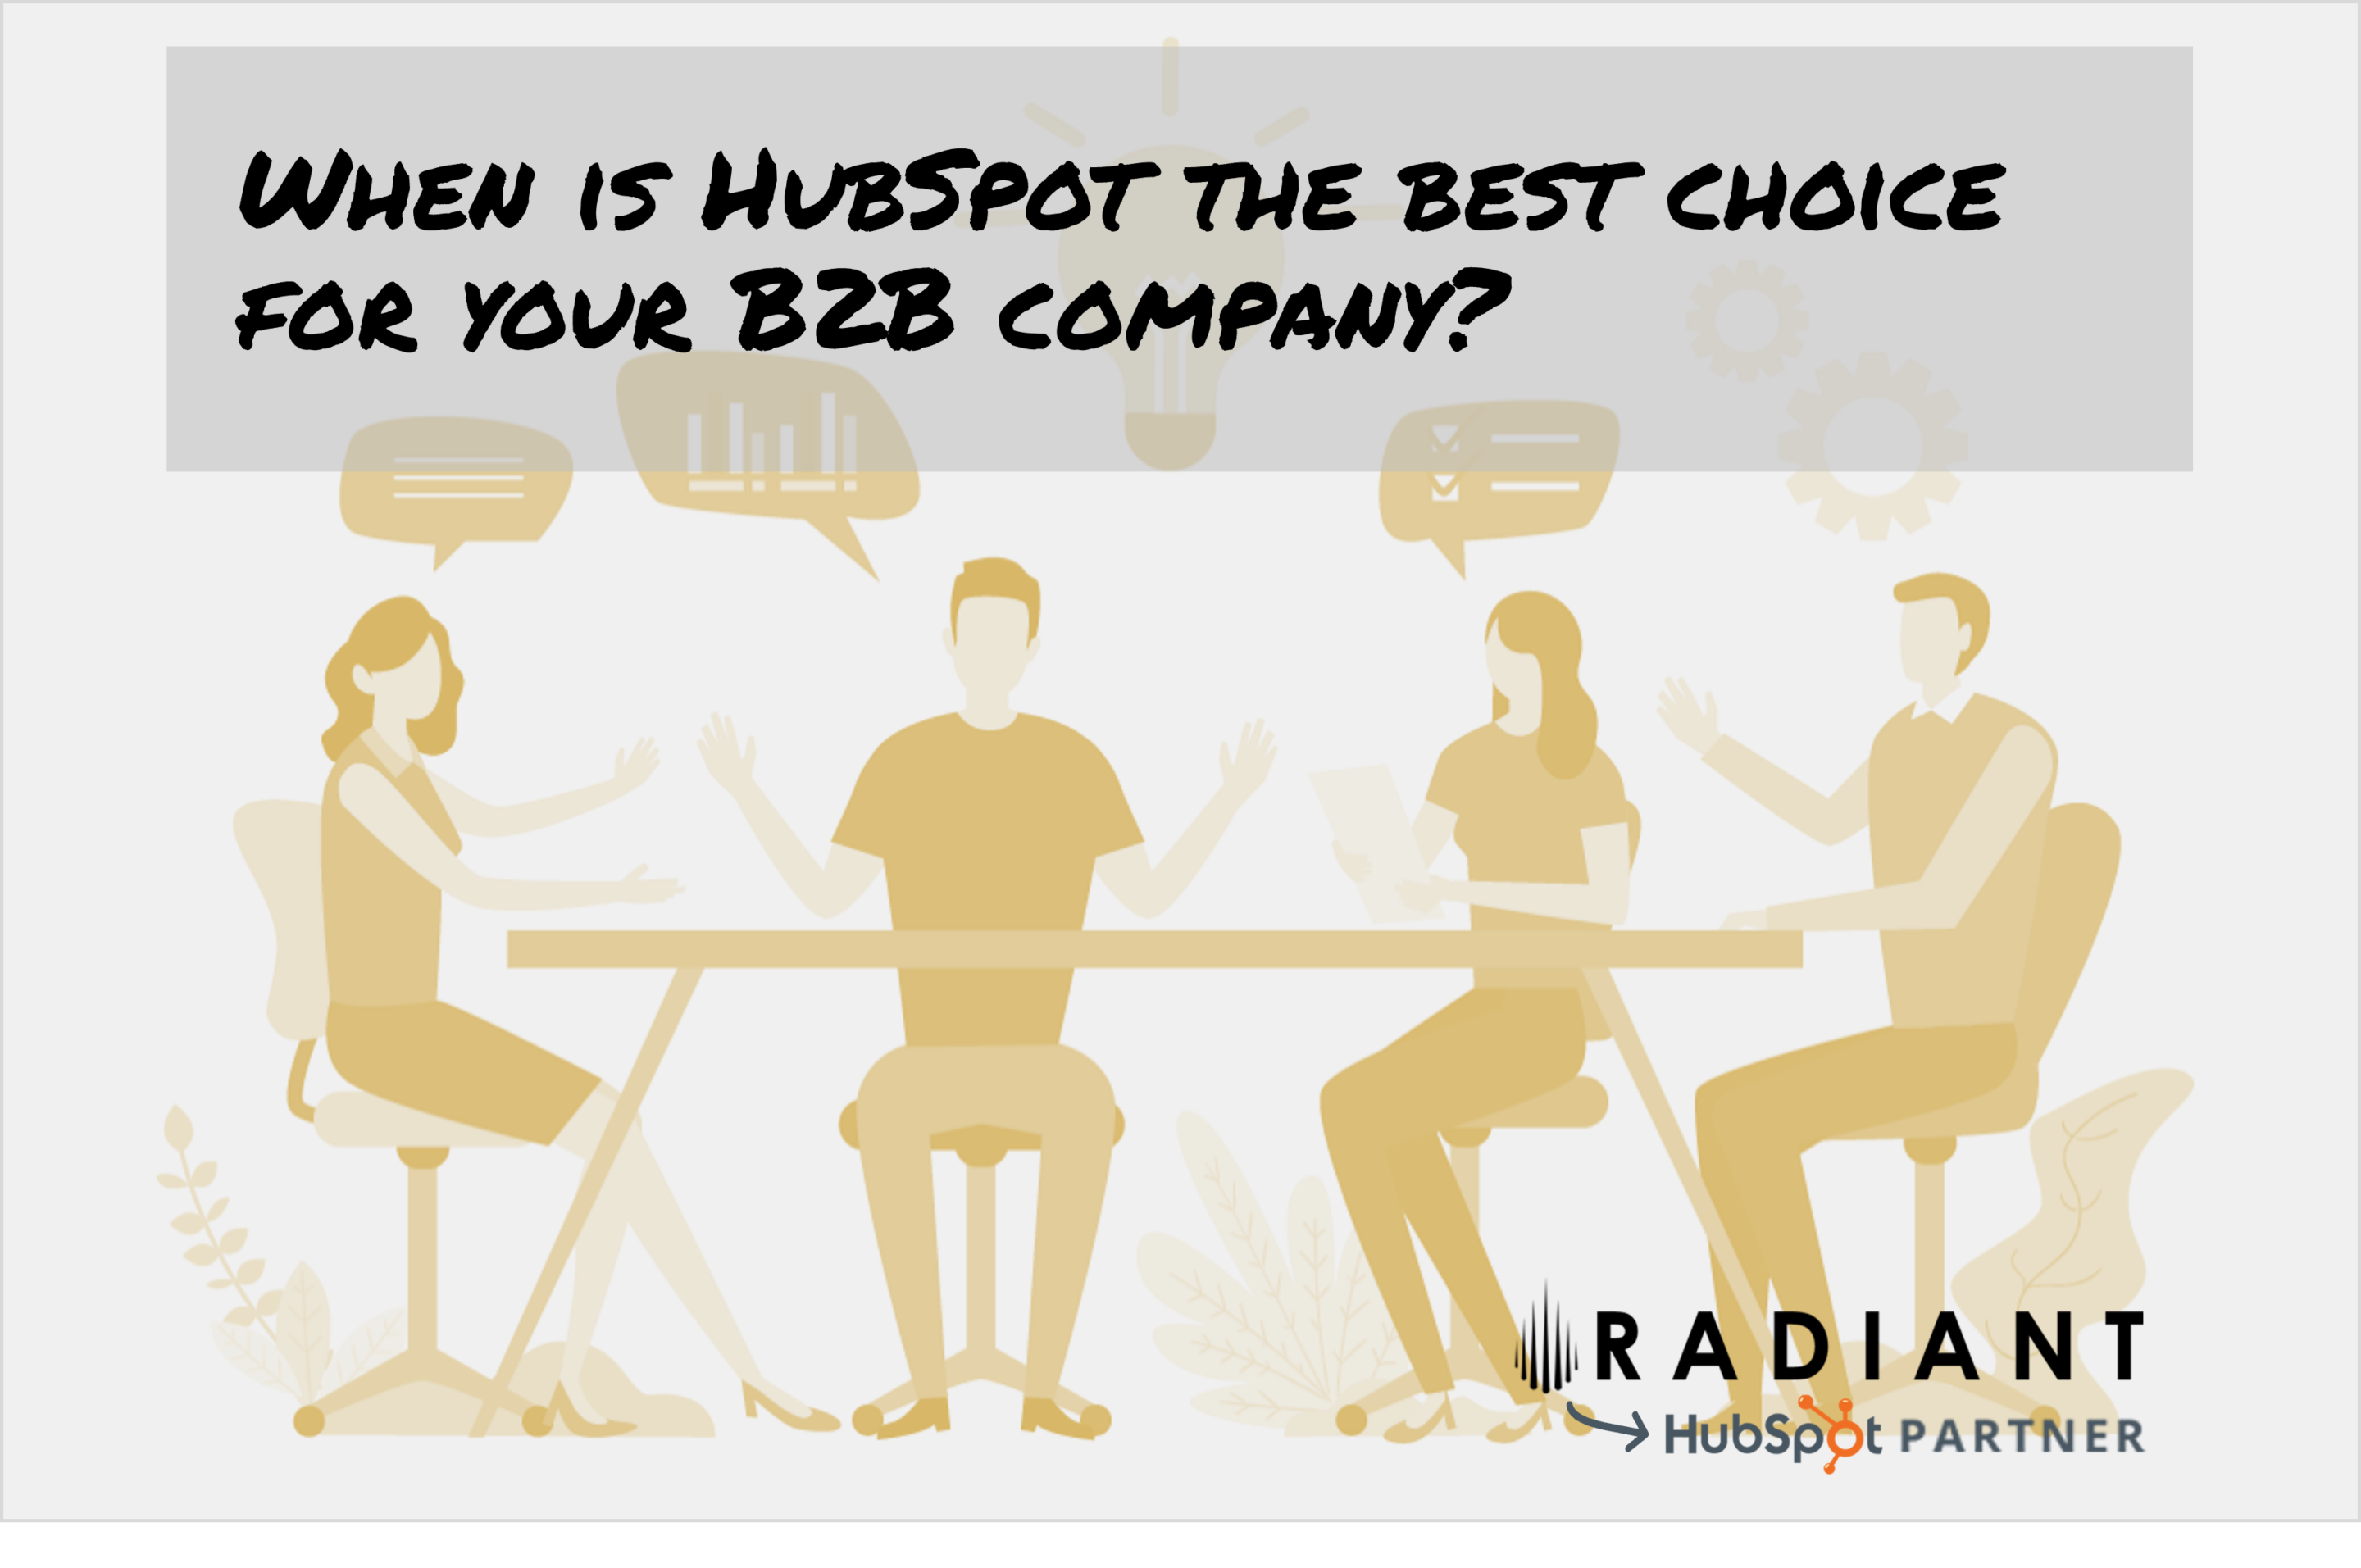 When is HubSpot the best choice for you? 1) B2B companies with a complex product/service 2) B2B companies with a hybrid sales proces